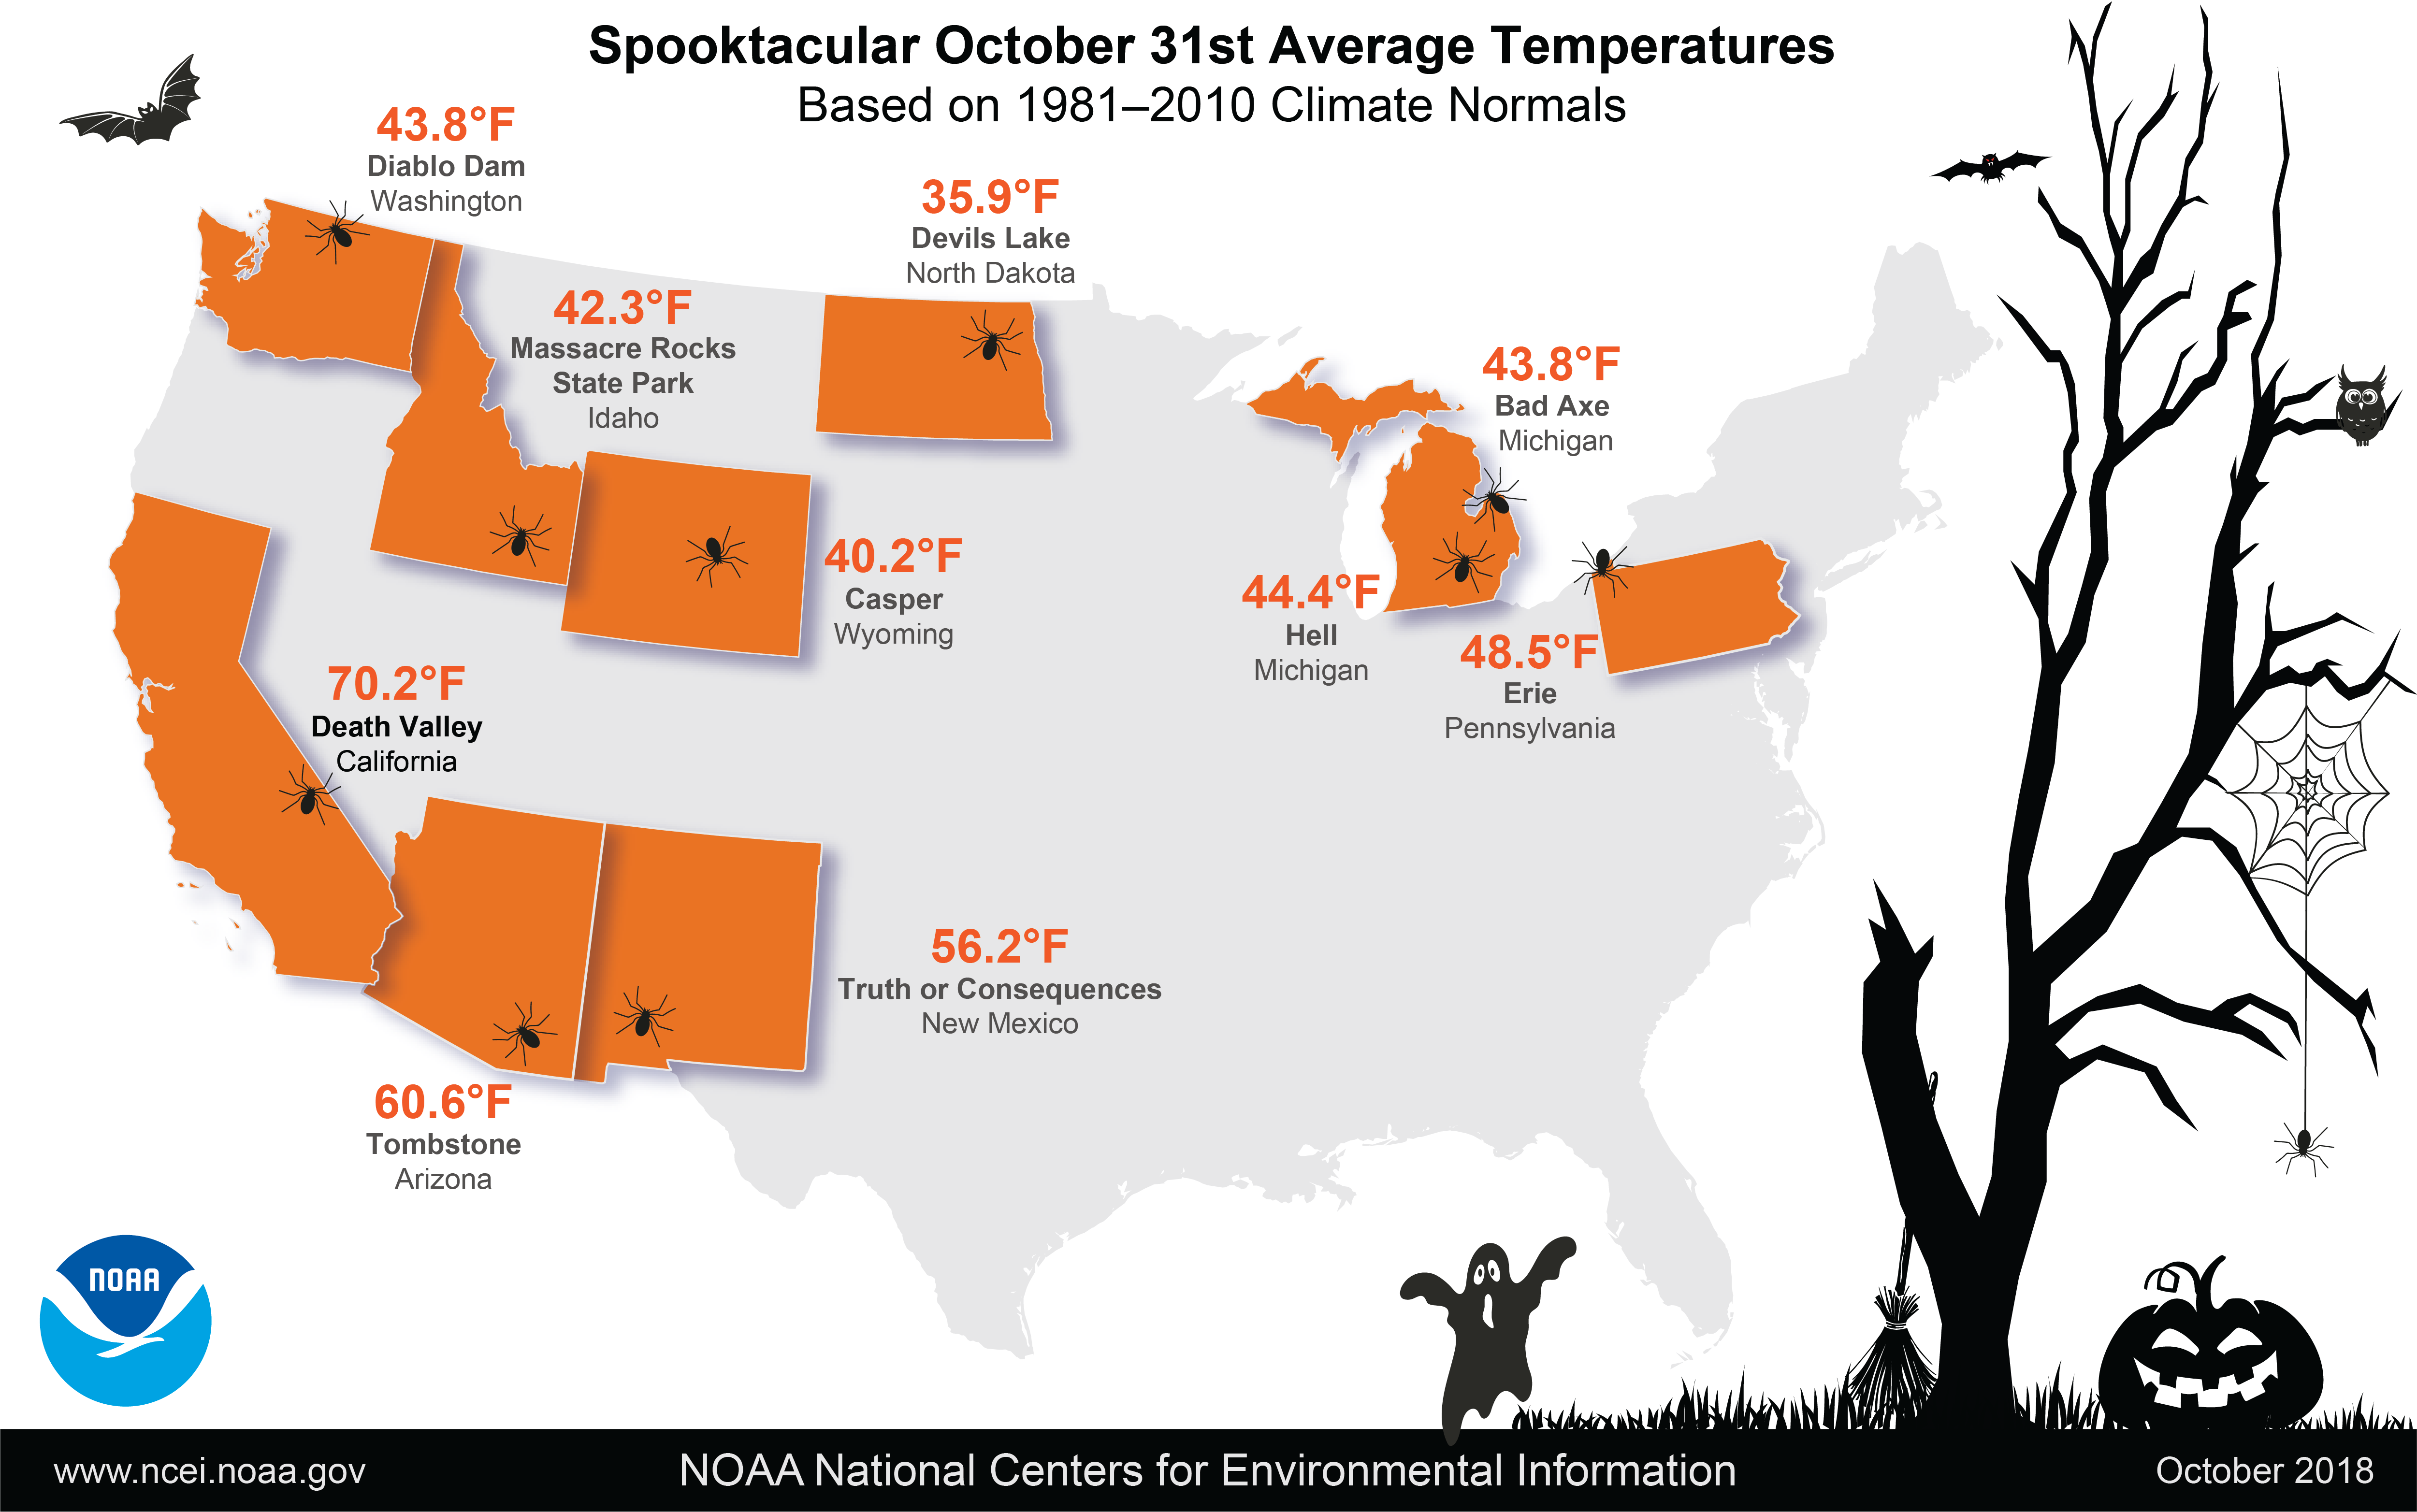 America’s Spooktacular October Climate News National Centers for